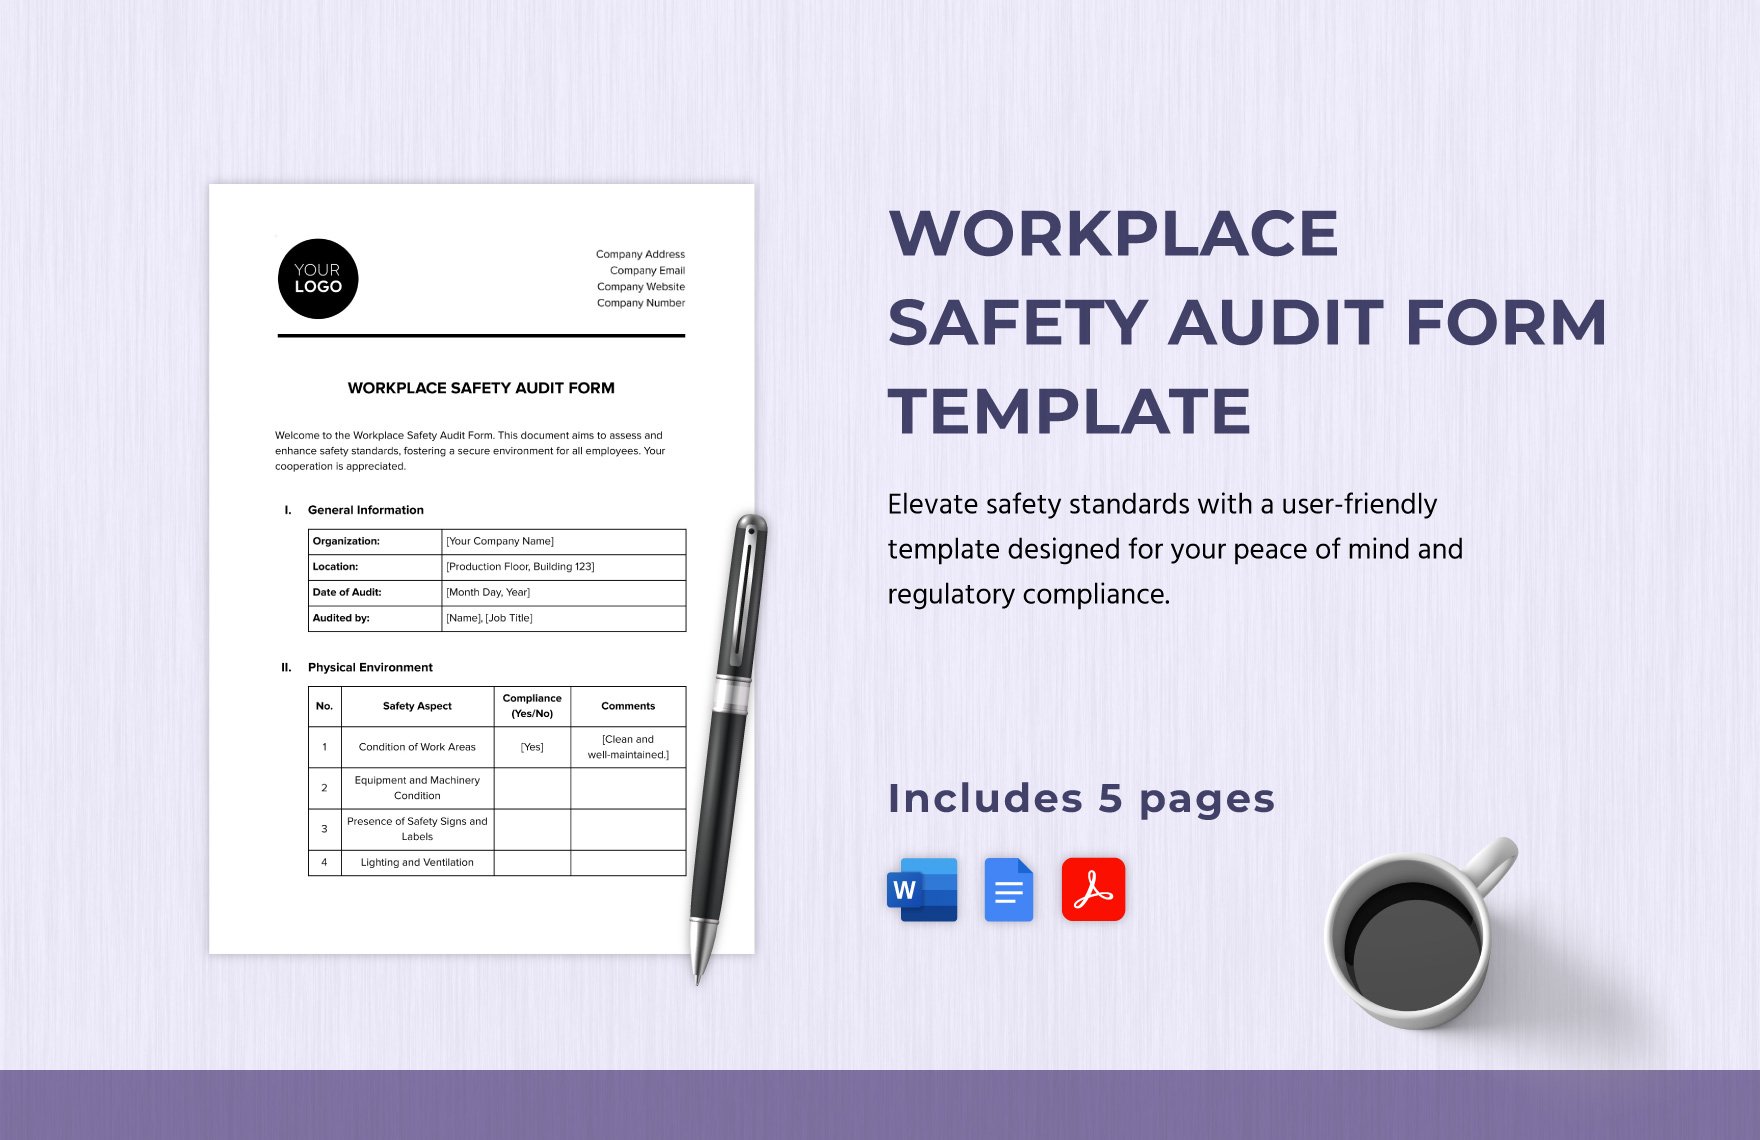 Workplace Safety Audit Form Template in Word, Google Docs, PDF